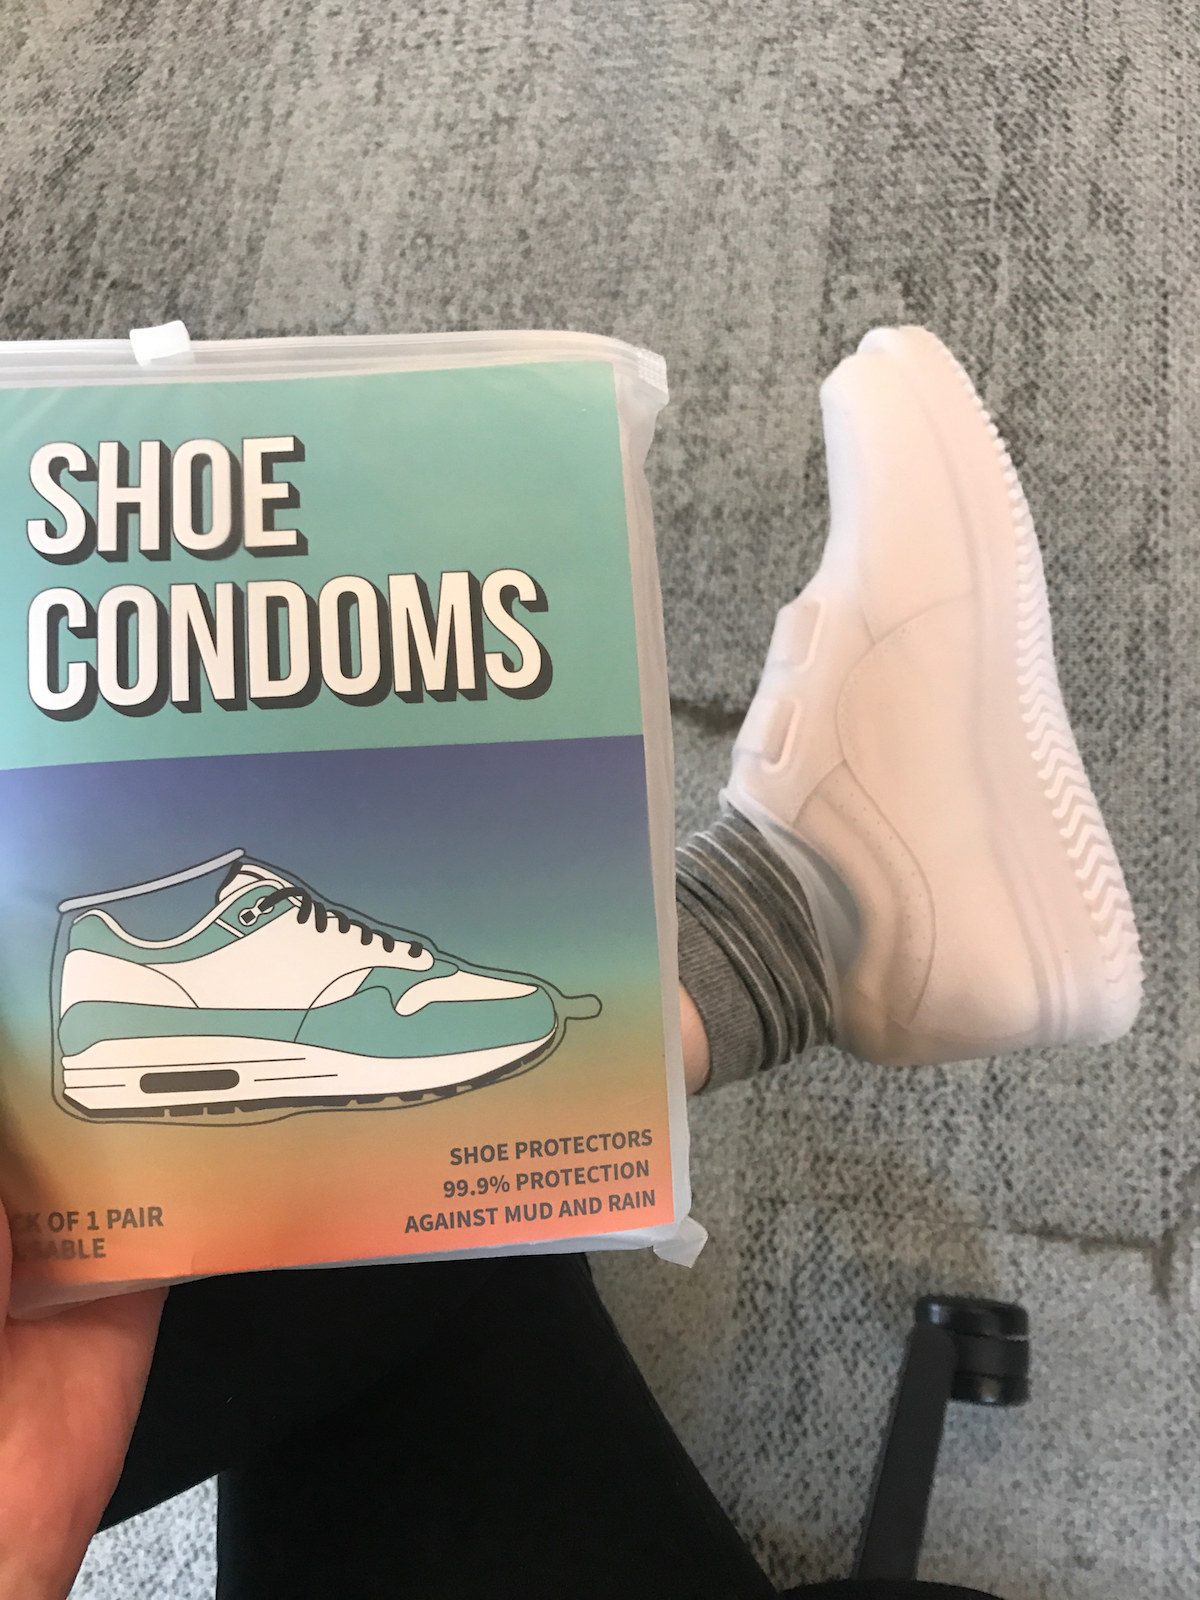 Don't be silly, wrap your willy-cool sneaks! 